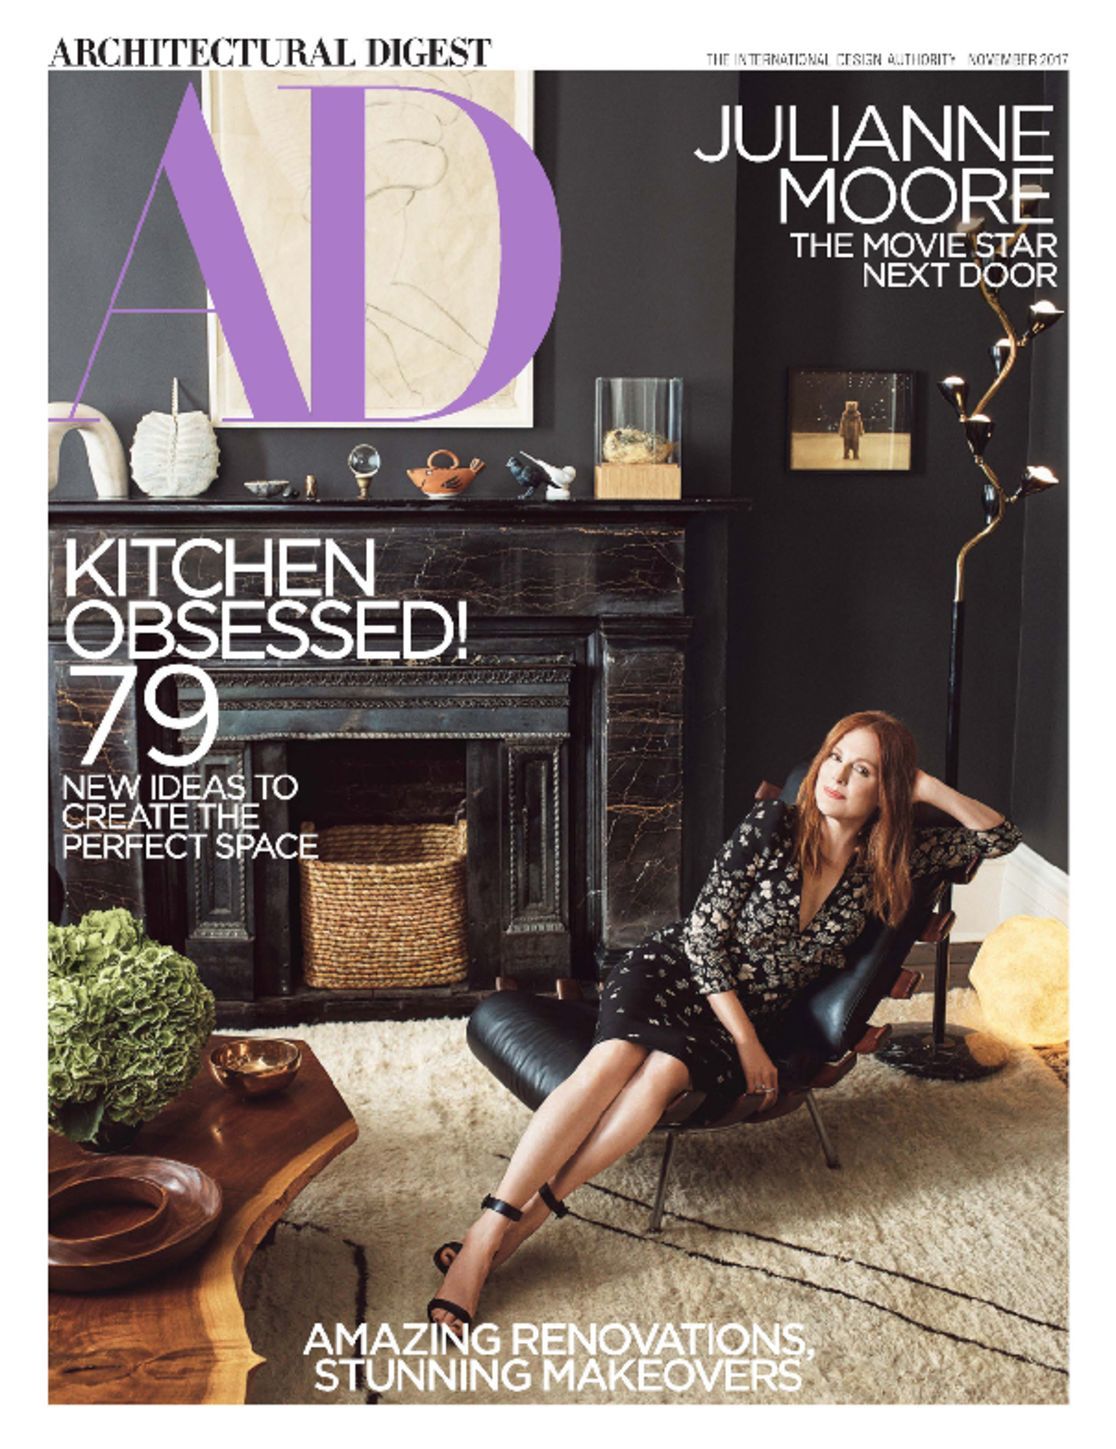 Architectural Digest Magazine | The International Design Authority - DiscountMags.com1116 x 1449